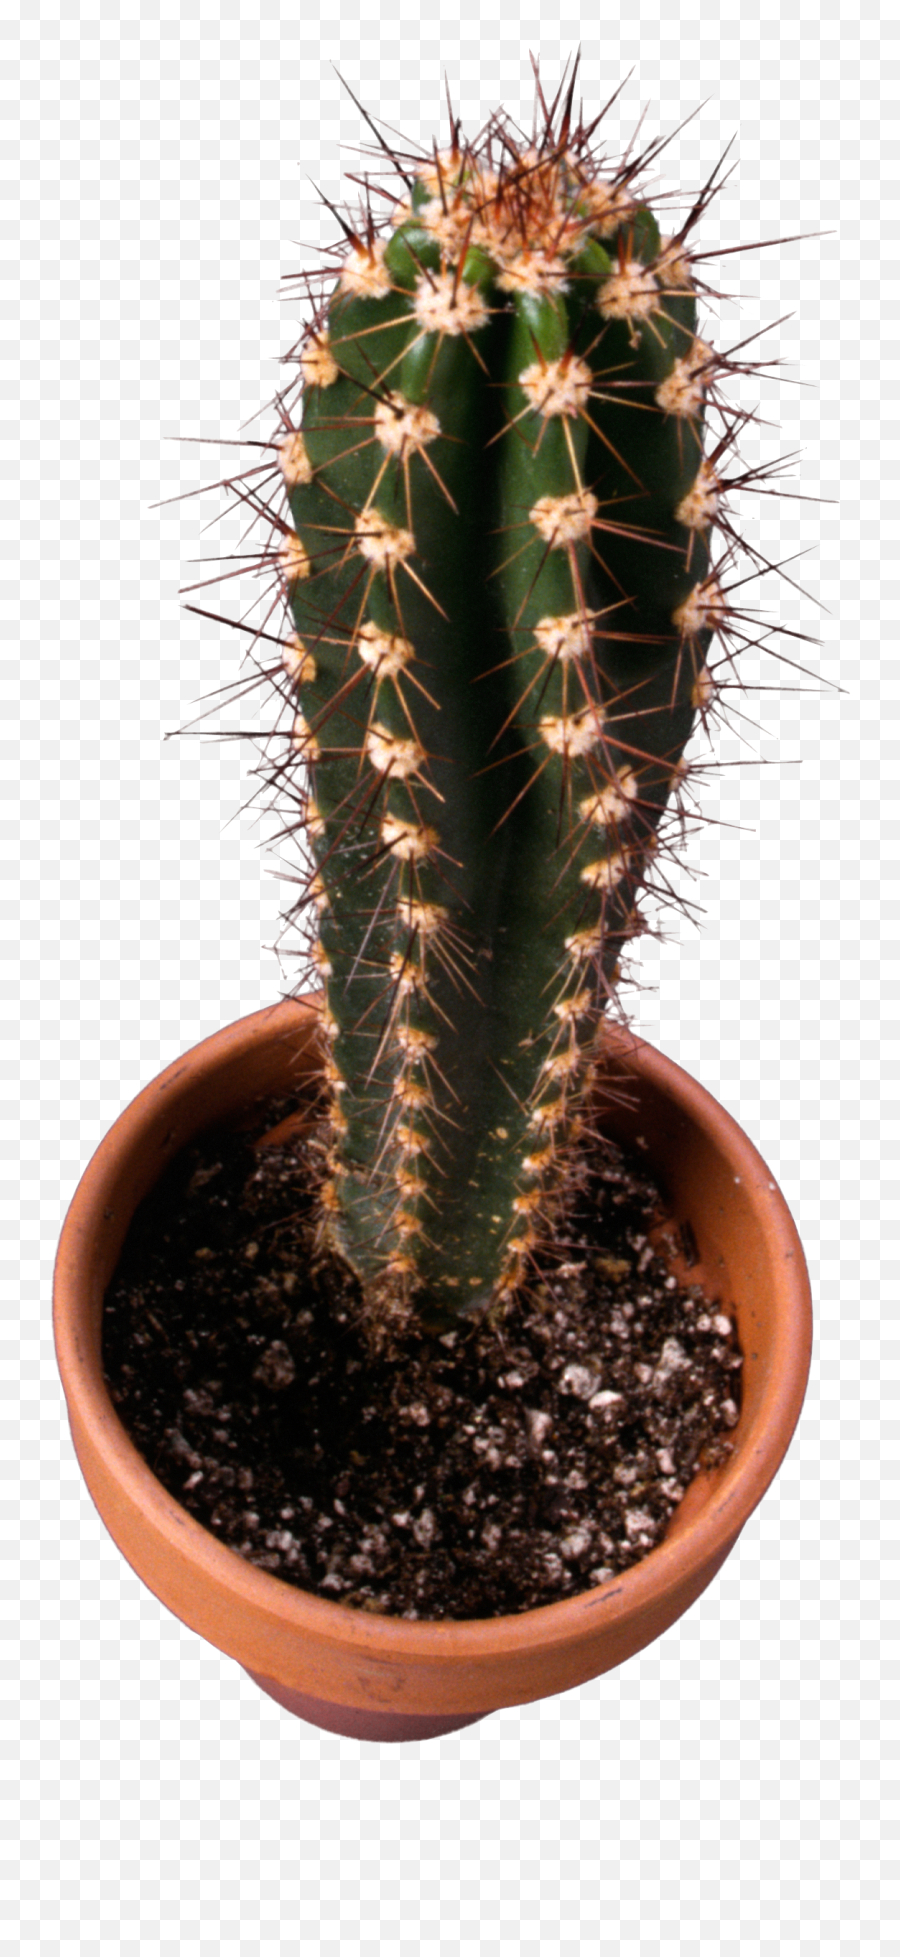 Download Classic Cactus Topview Png Plant Top View